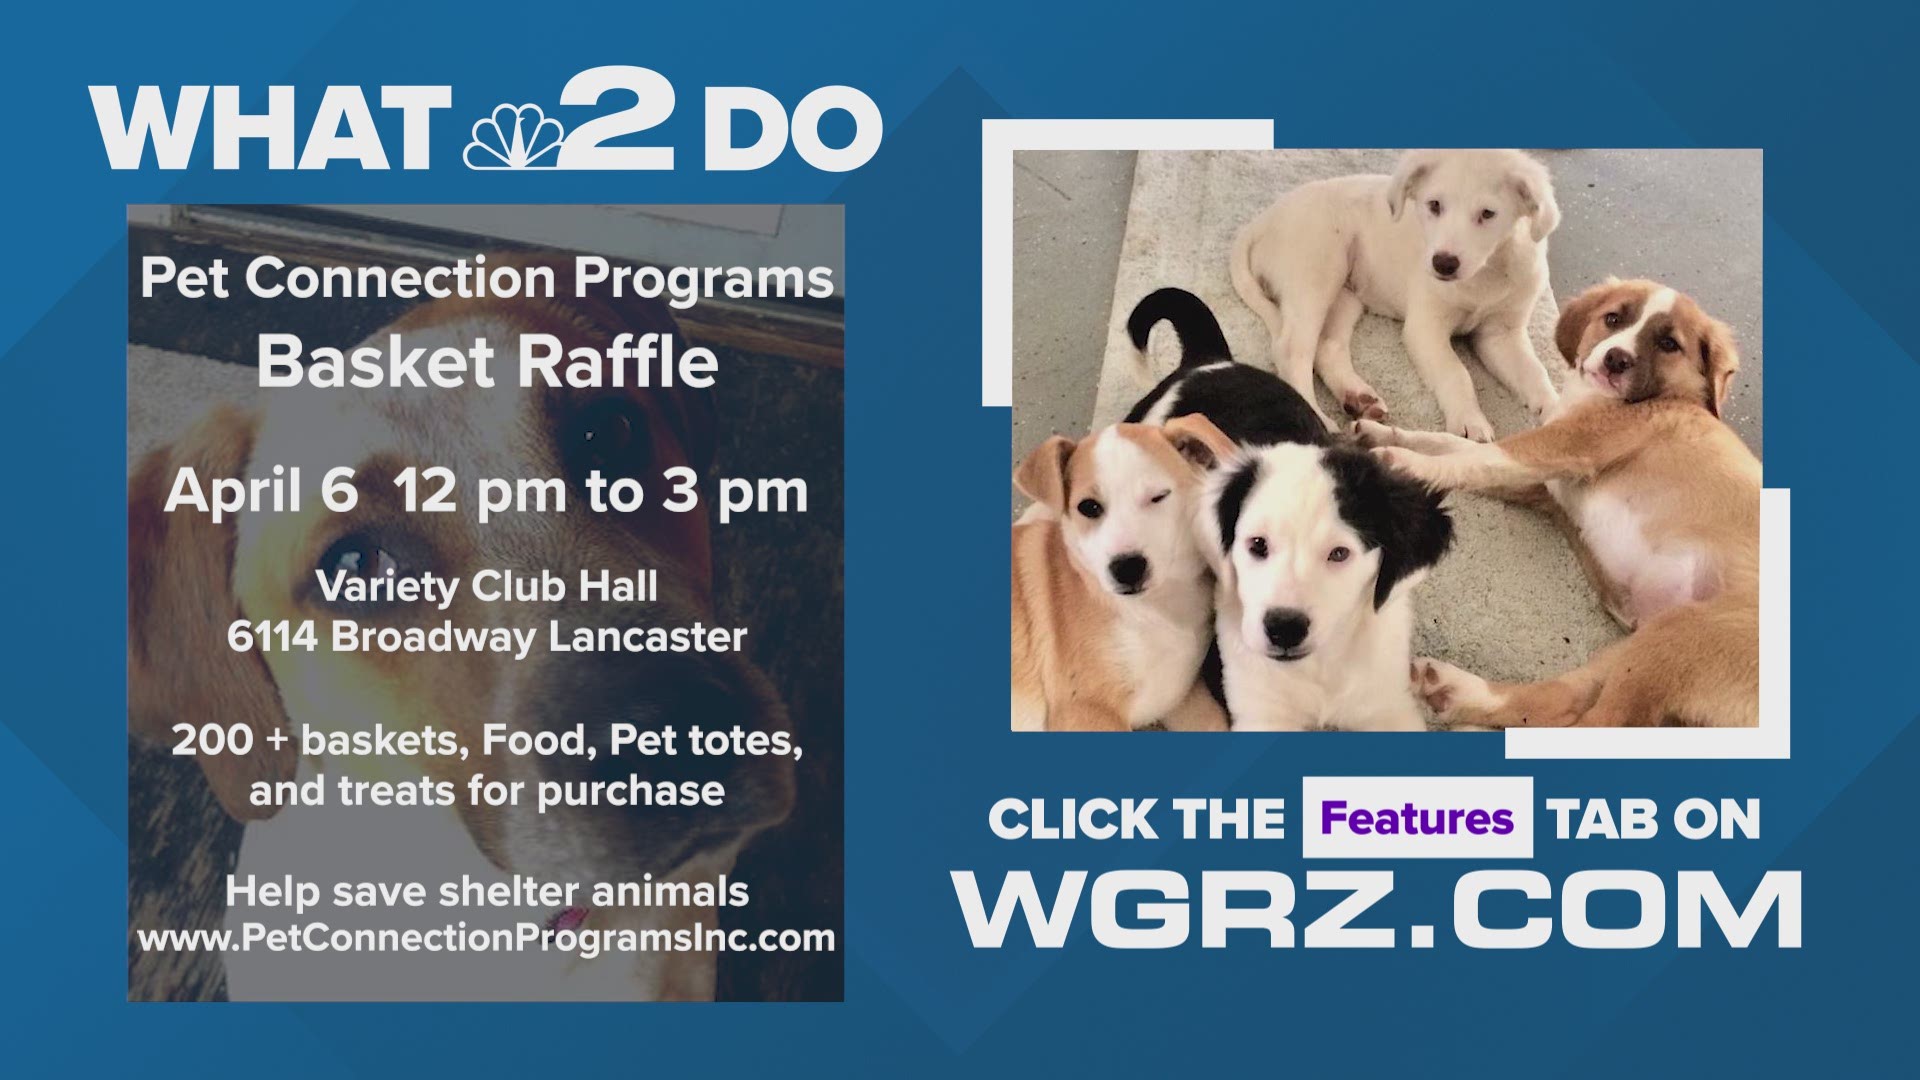 Help support shelter animals by attending Pet Connection Programs Inc. Basket Raffle.